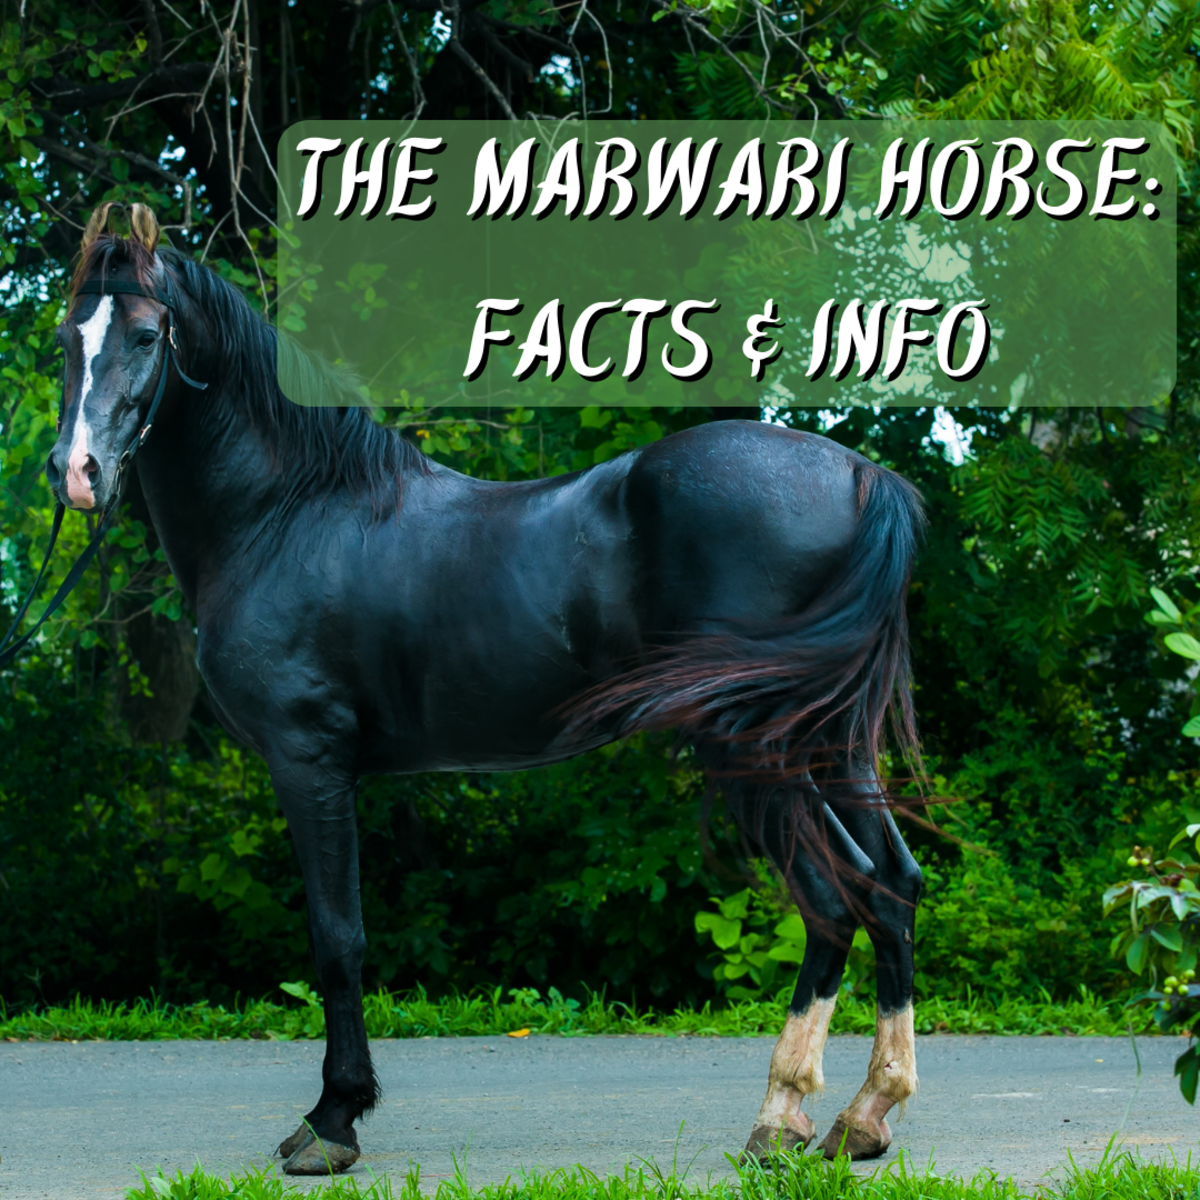 Read on to learn all about the Marwari horse of India, including its history, temperament, near-extinction, and contemporary survival. A highly informative video is also included.